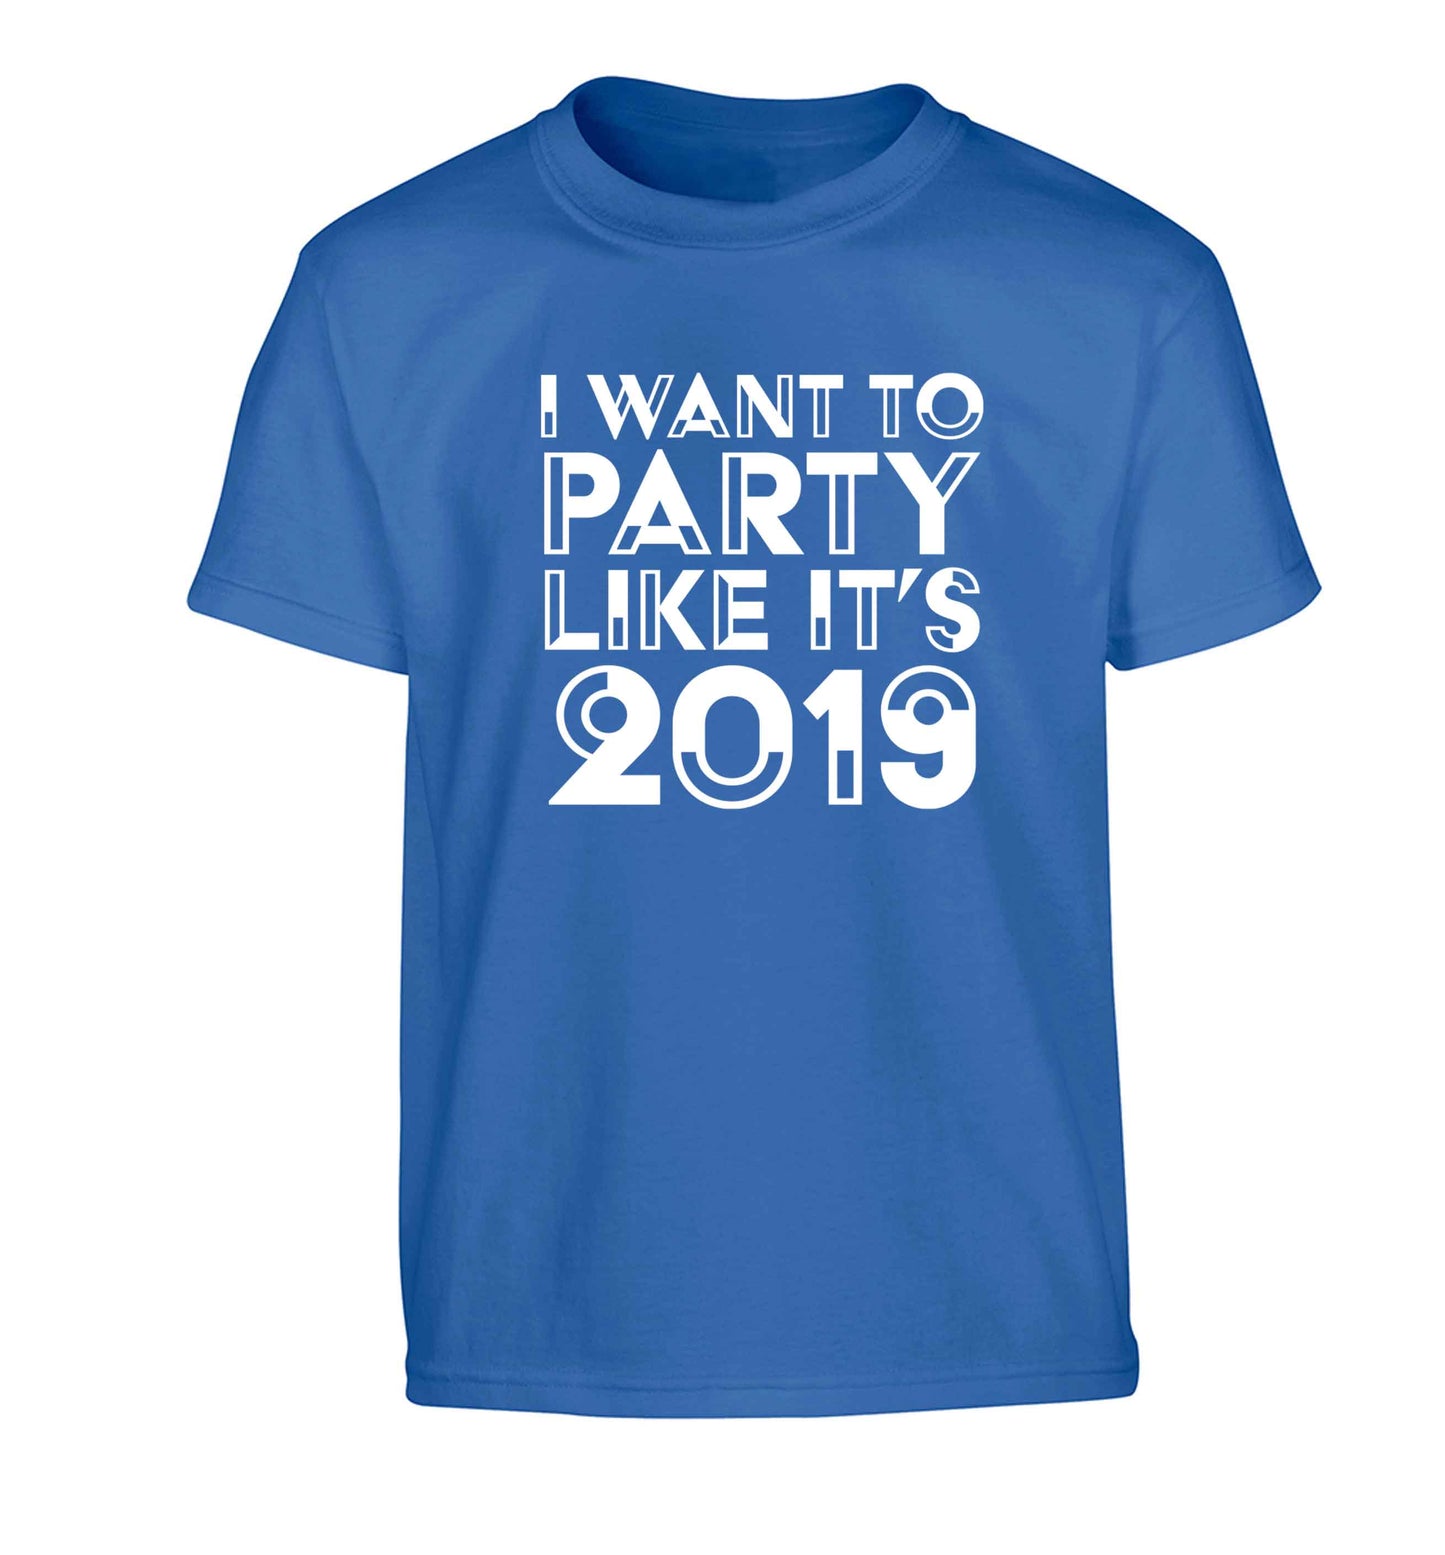 I want to party like it's 2019 Children's blue Tshirt 12-13 Years